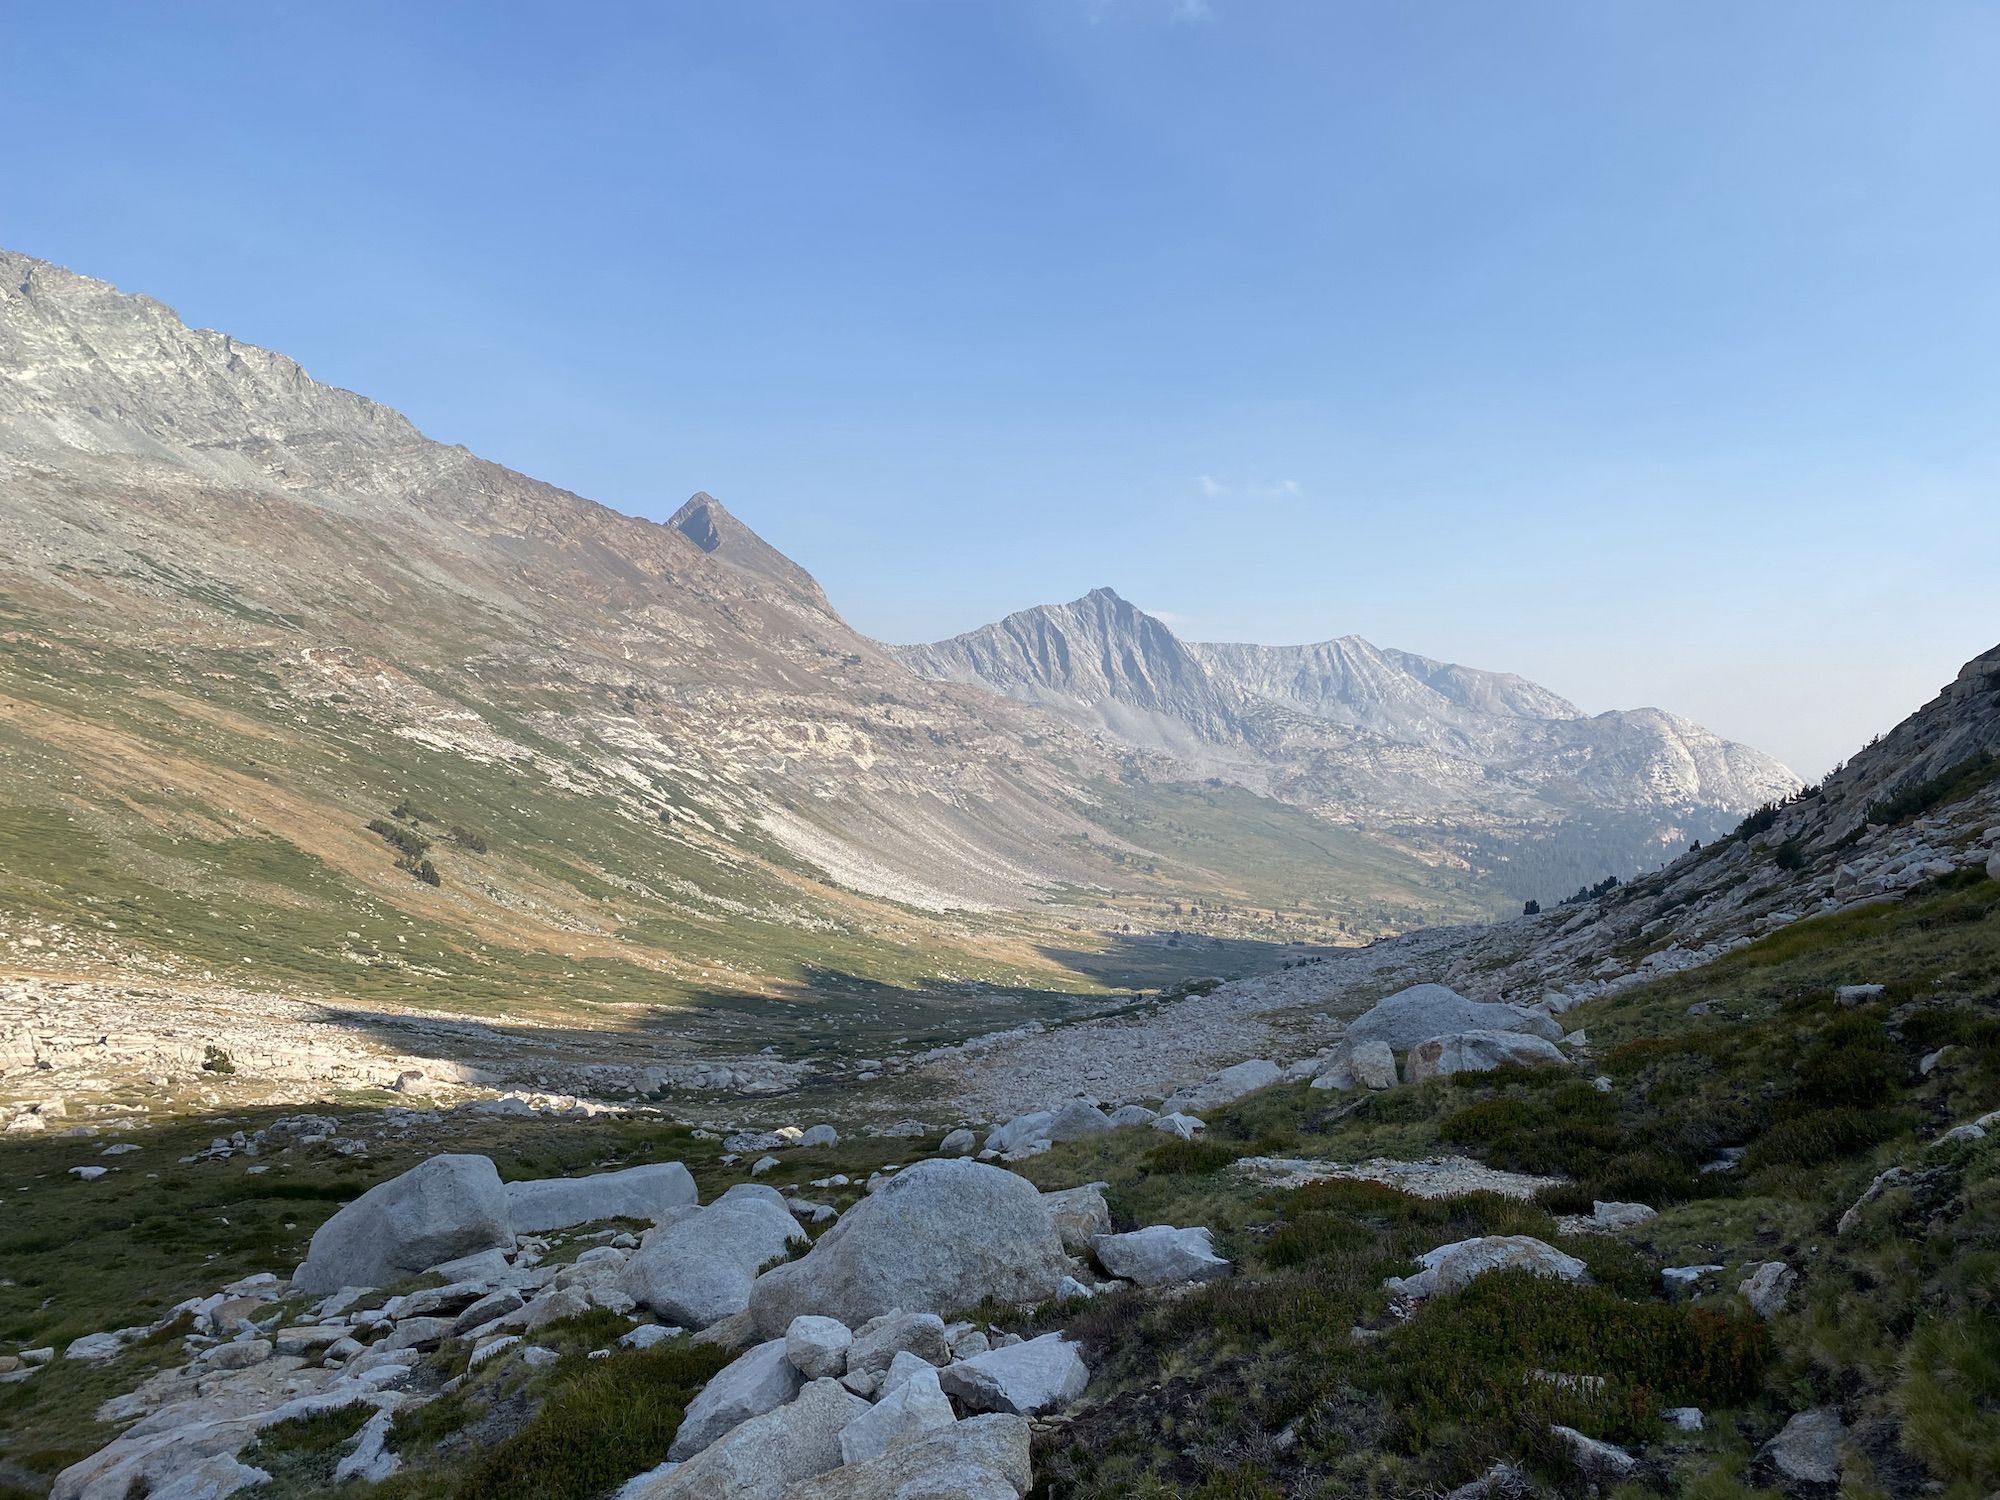 A rock and tundra covered mountain valley.